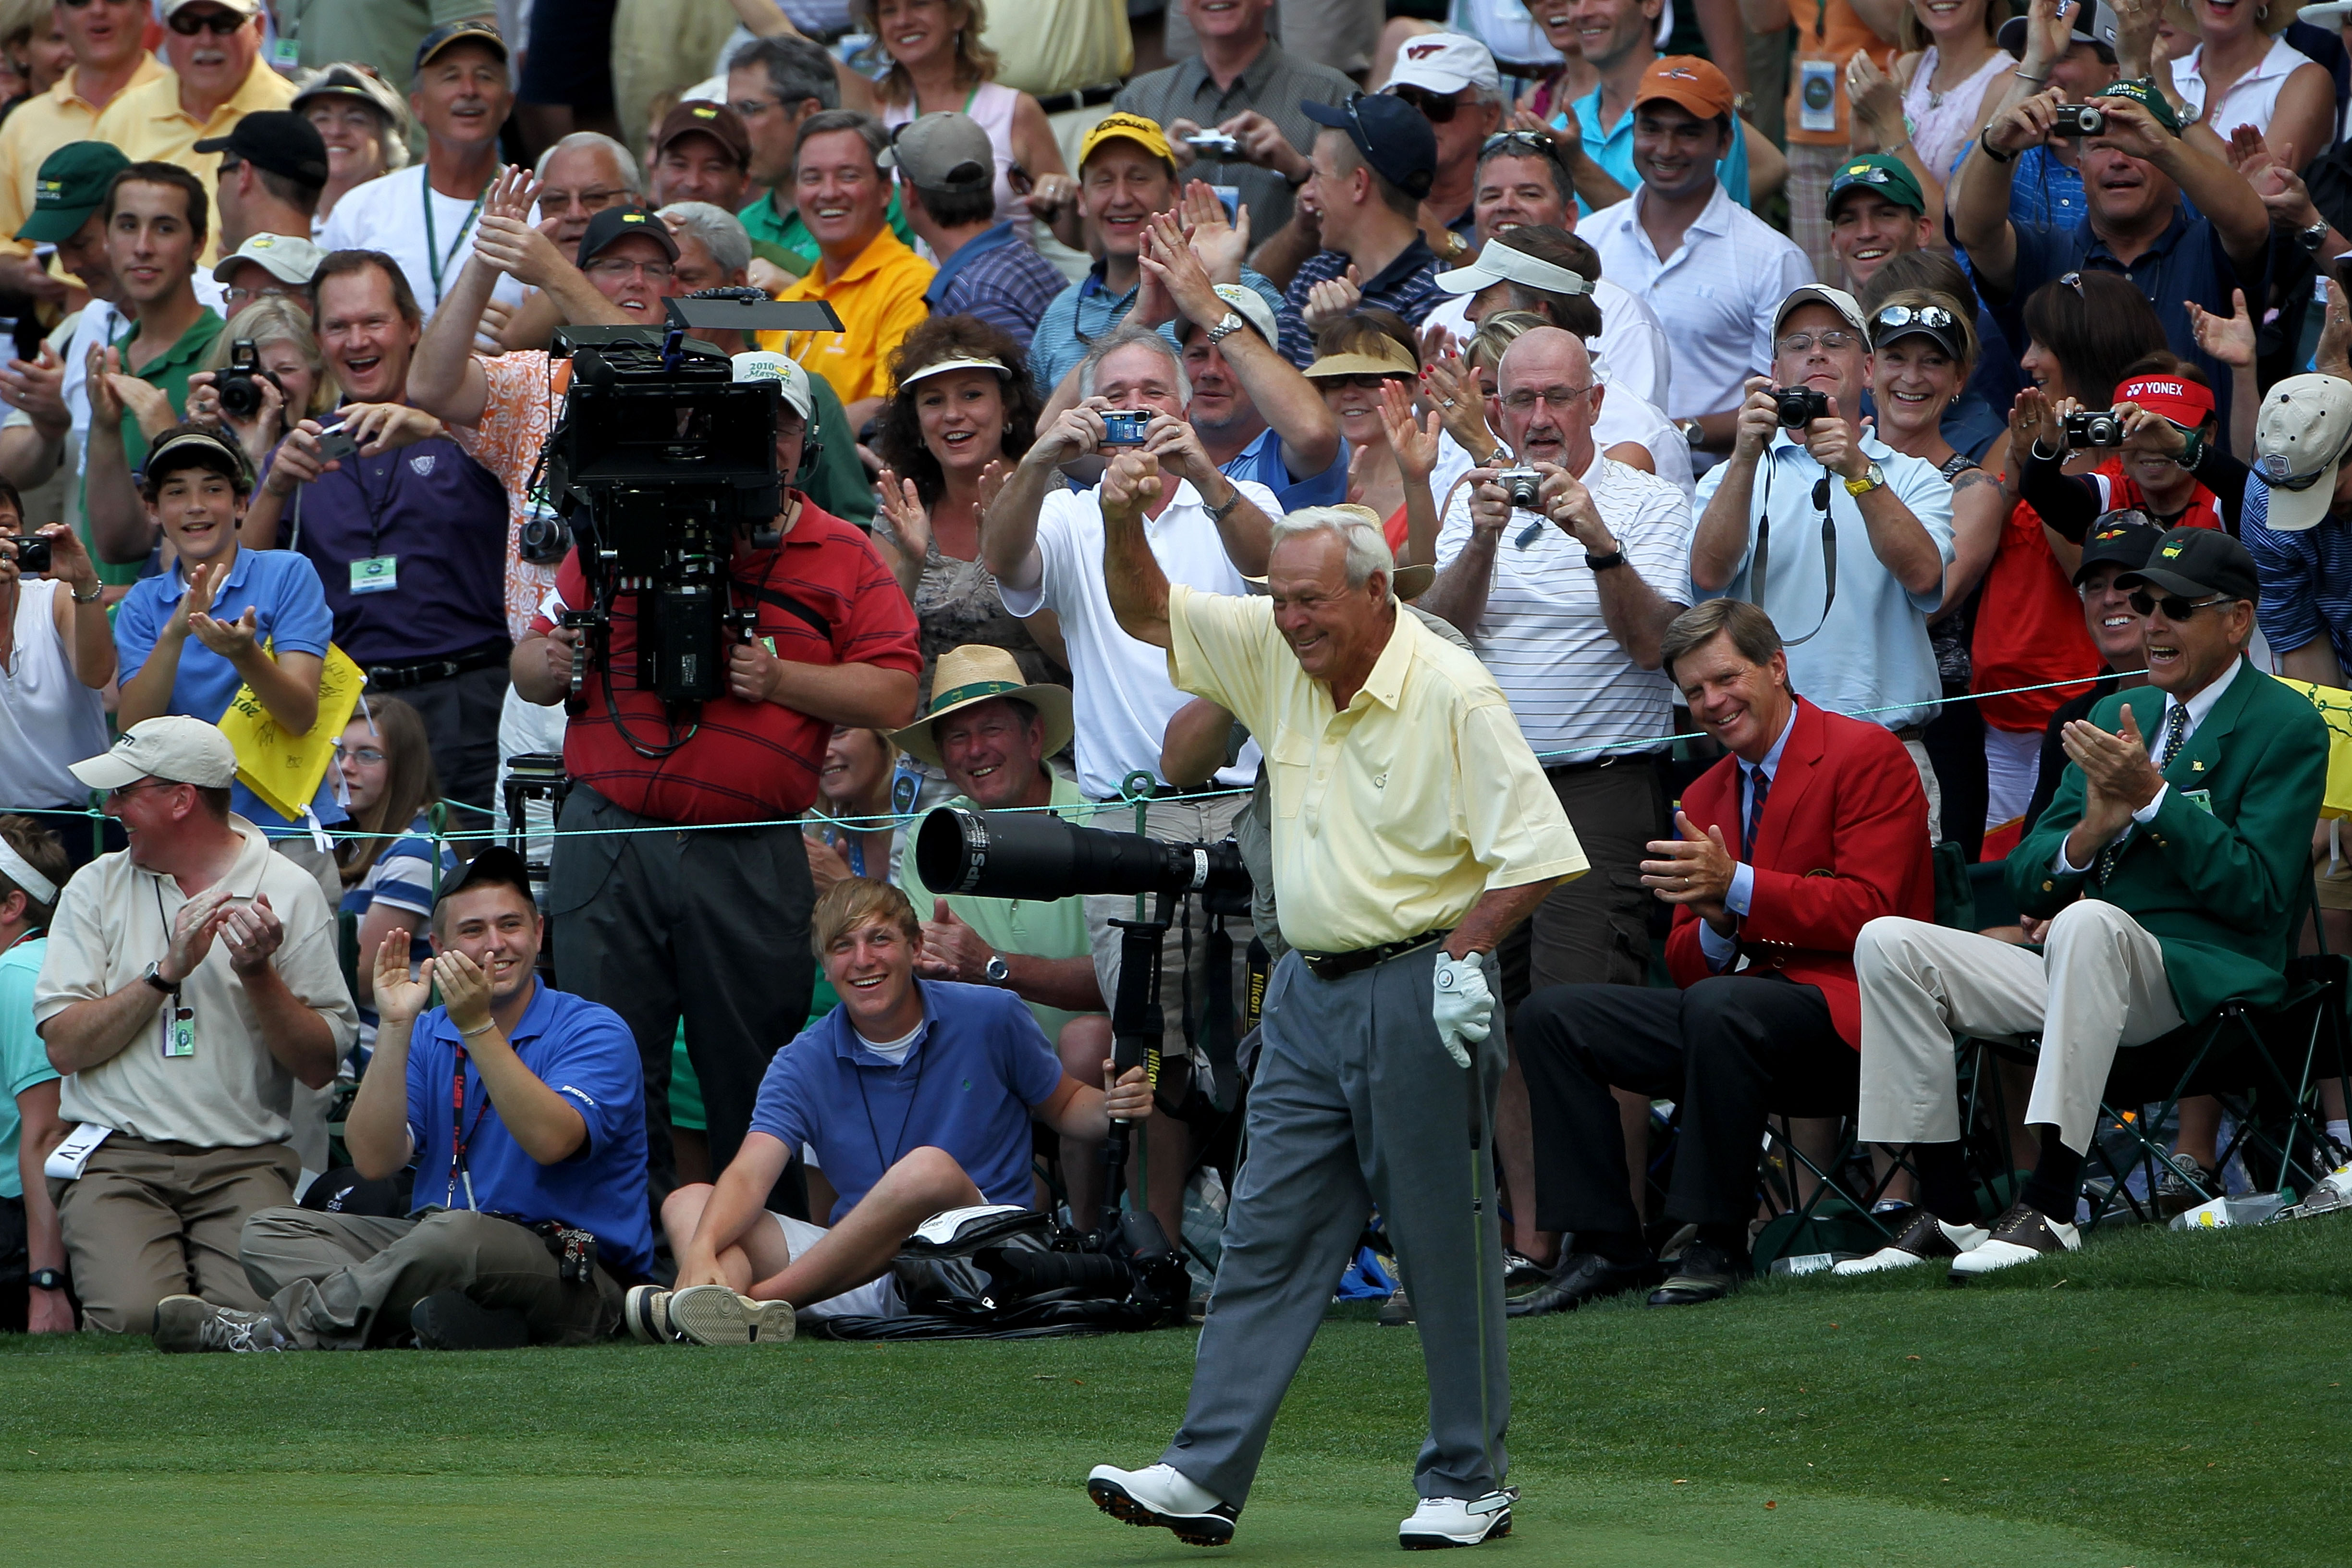 AUGUSTA, GA - APRIL 07:  Arnold Palmer celebrates after a long putt during the Par 3 Contest prior to the 2010 Masters Tournament at Augusta National Golf Club on April 7, 2010 in Augusta, Georgia.  (Photo by Jamie Squire/Getty Images)